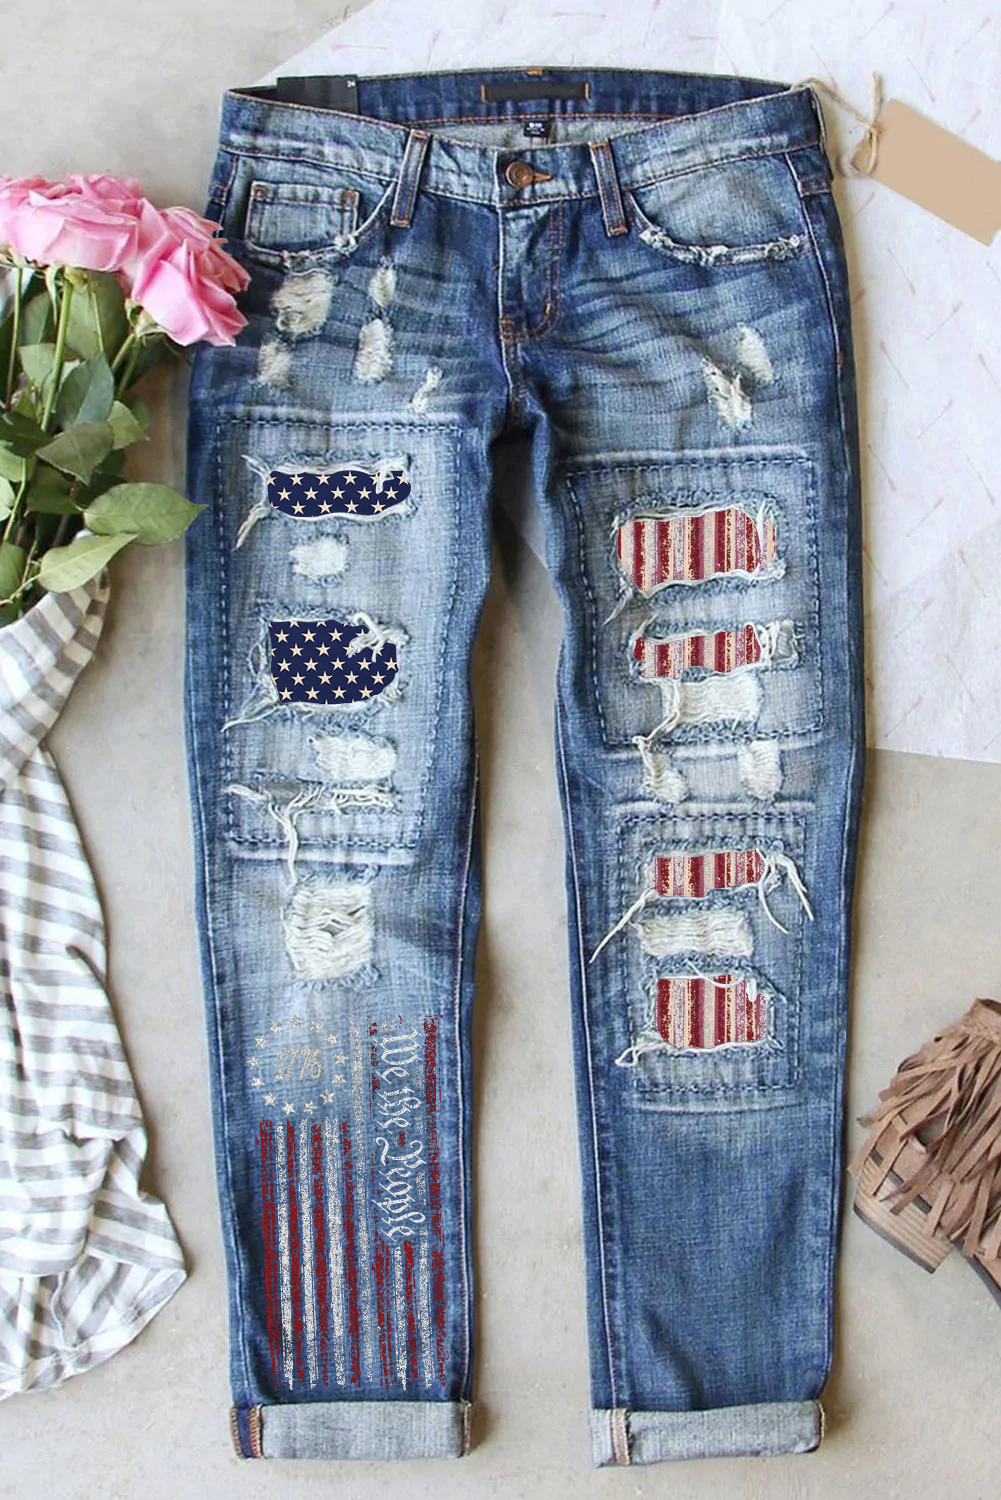 1776 WE THE PEOPLE JEANS